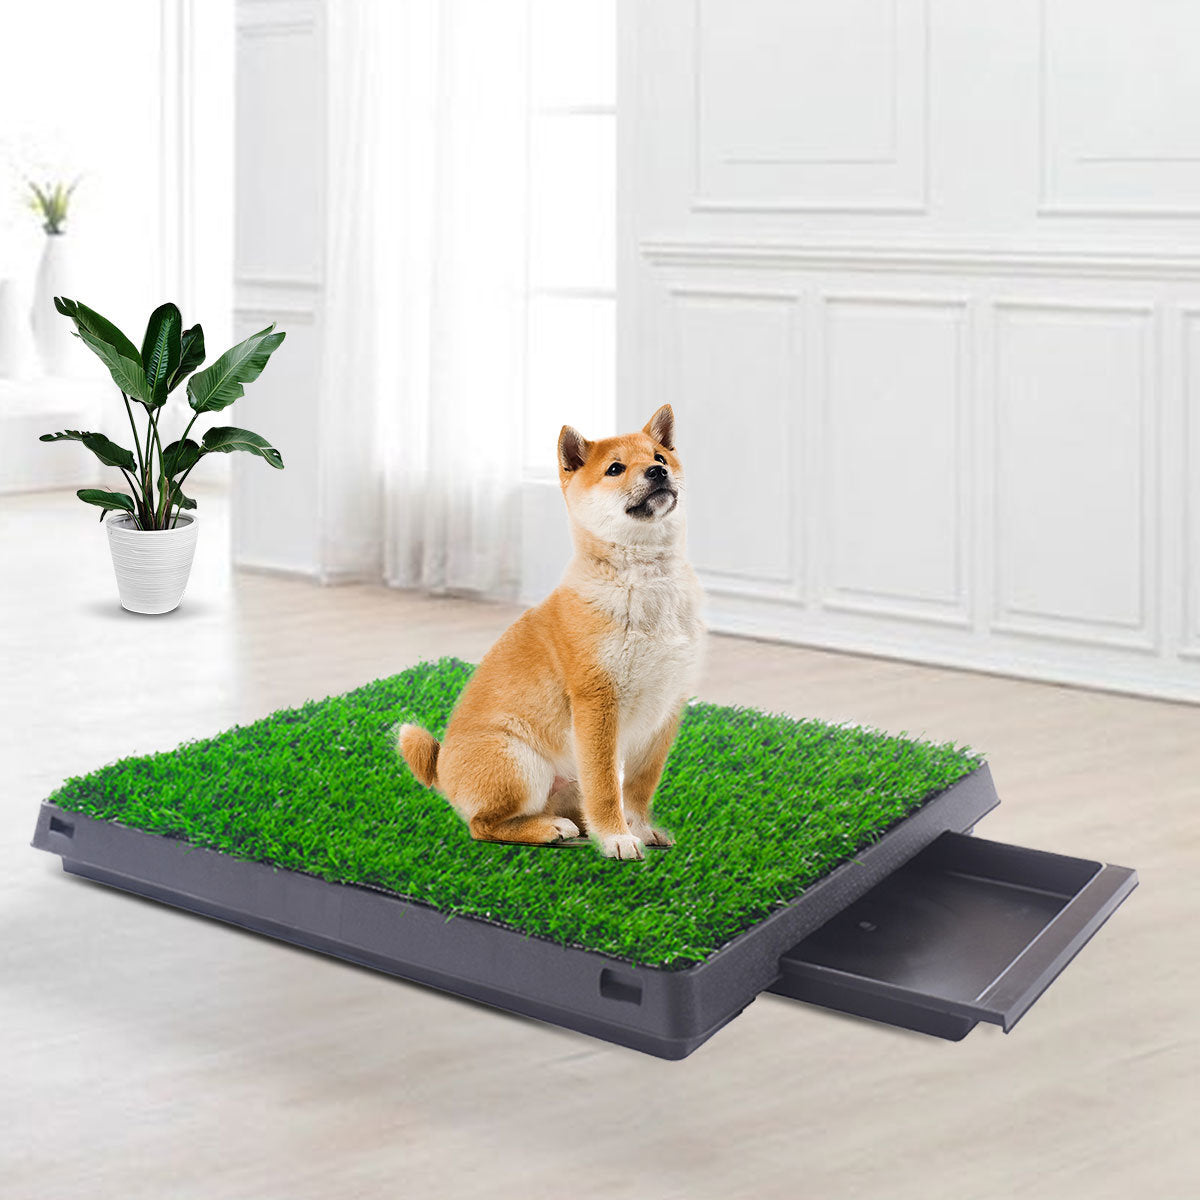 Artificial Dog Grass Mat, Indoor Potty Training, Pee Pad for Pet,with the drawer